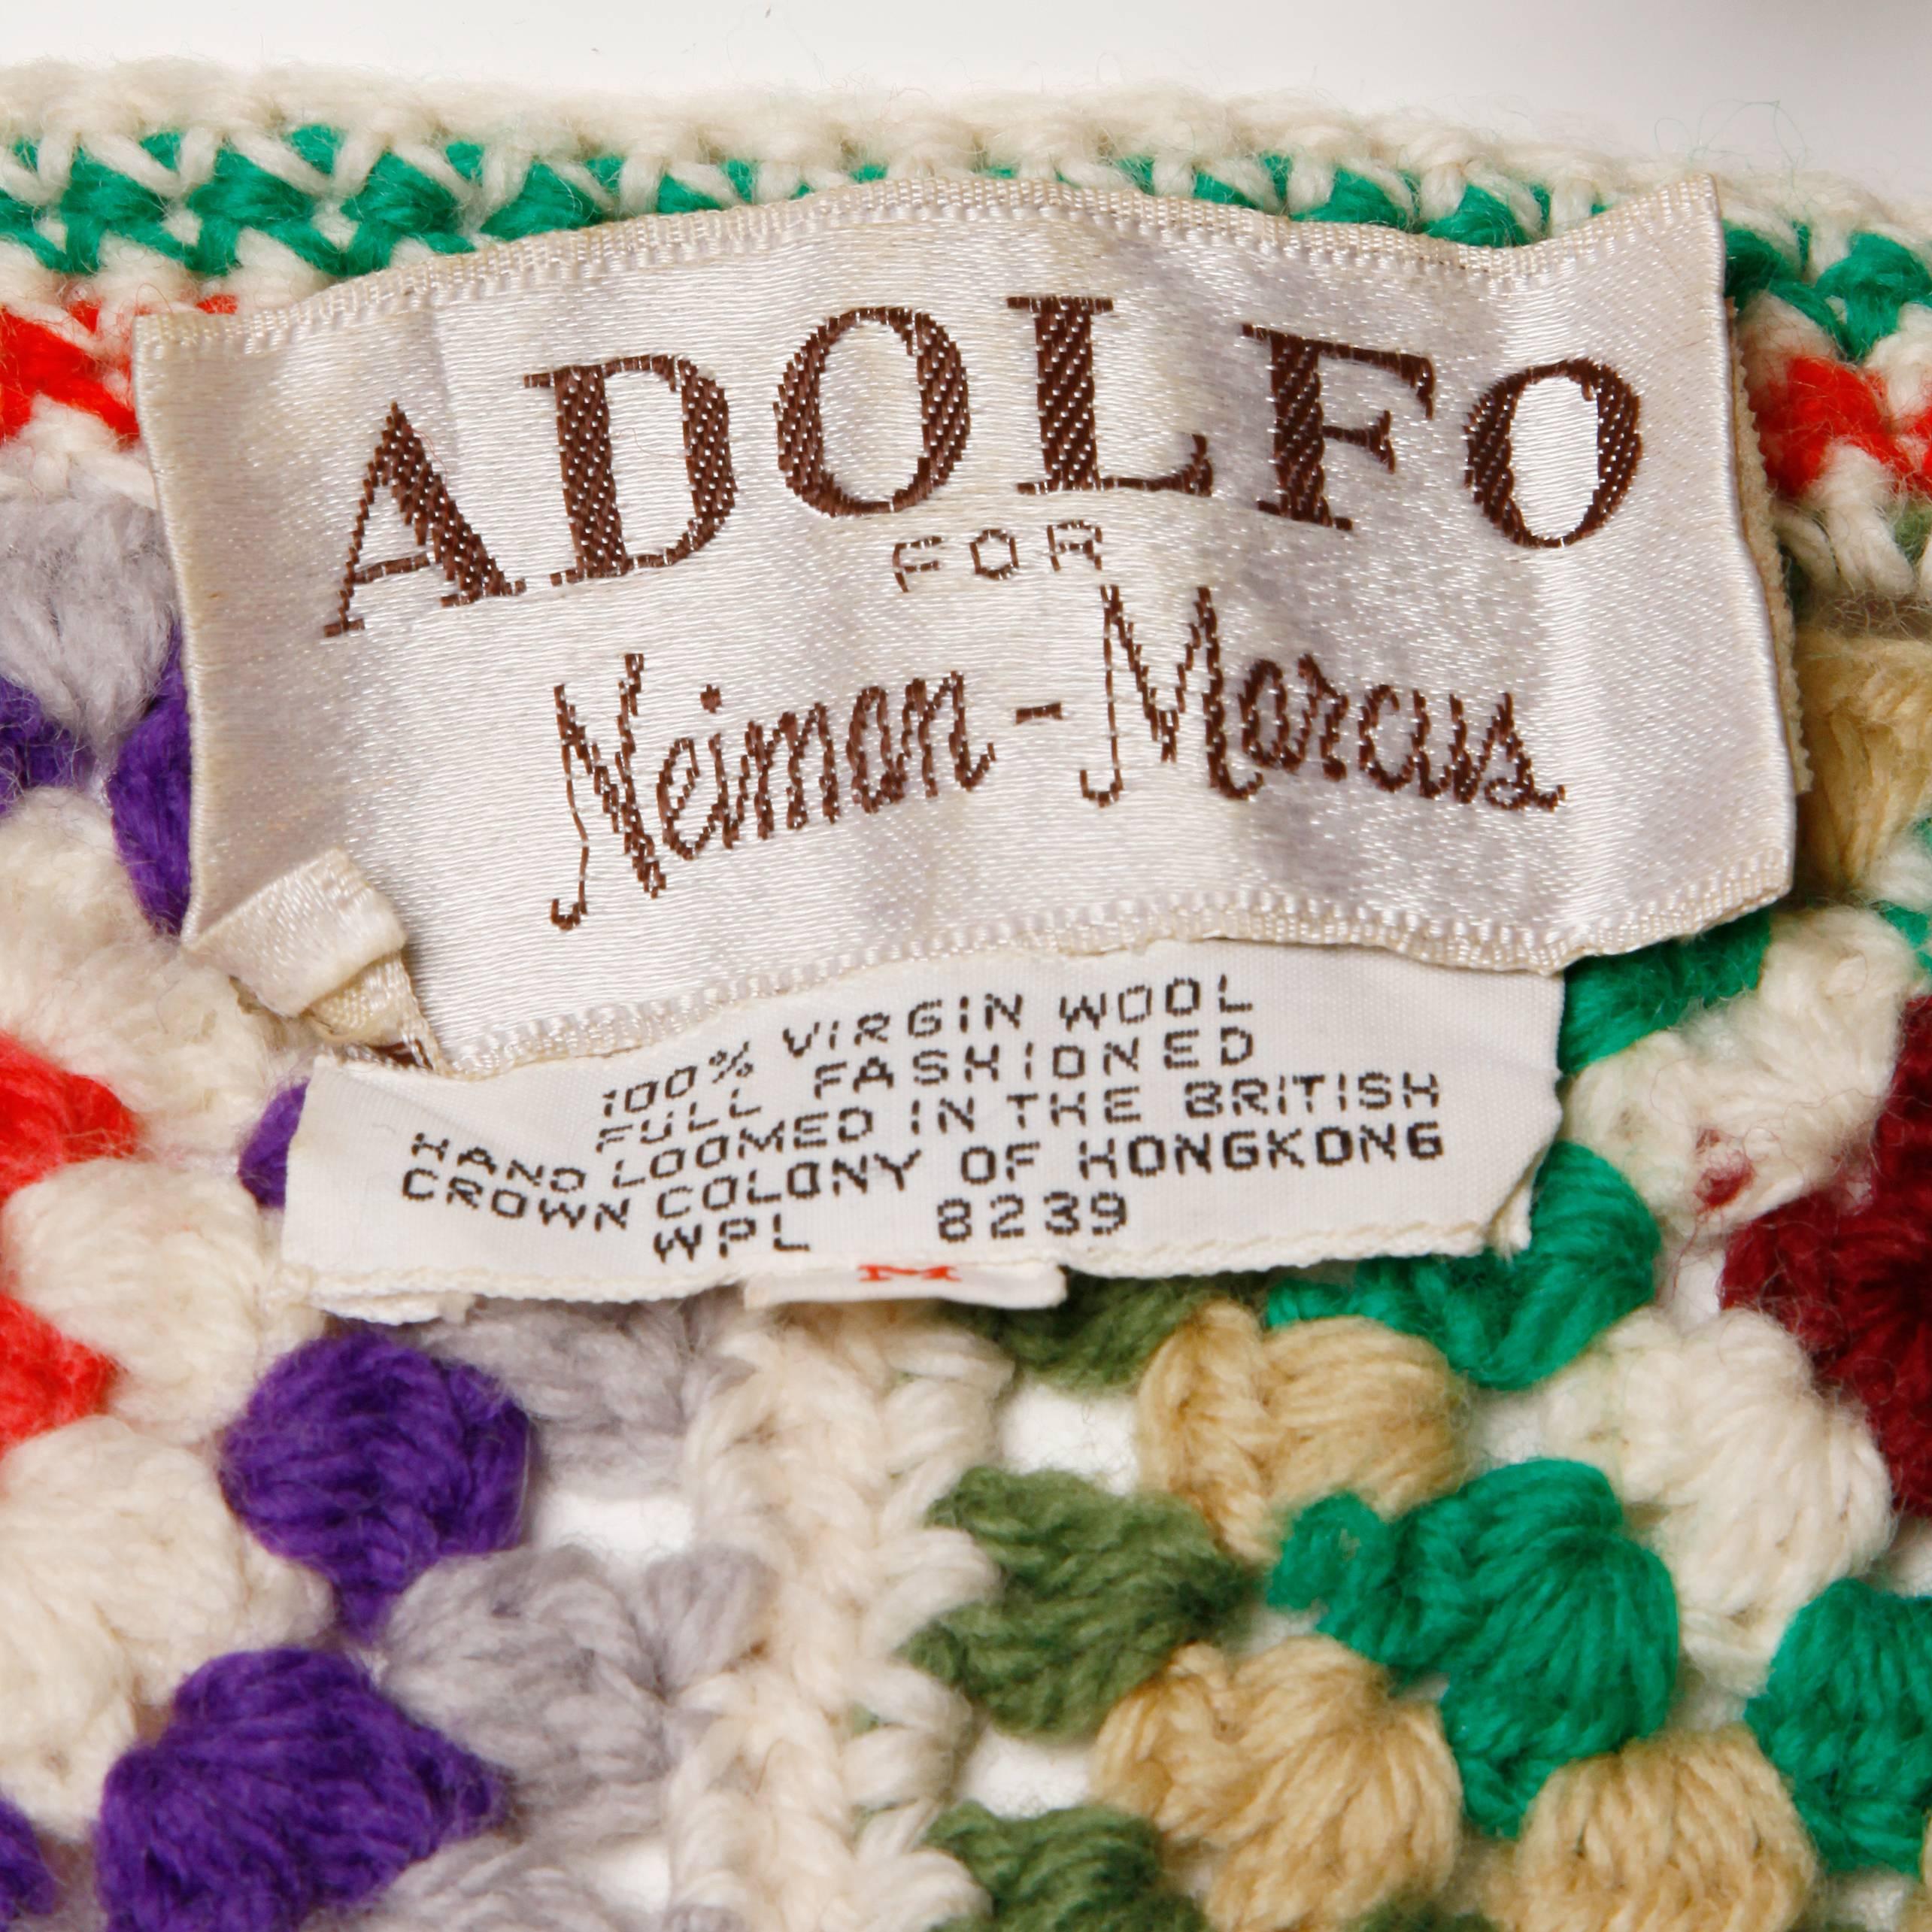 Vibrant wool vest or top in hand crocheted Granny Squares by Adolfo for Neiman Marcus. Unlined. Made in the British Crown Colony of Hong Kong. The marked size is medium and the piece fits like a modern small-medium. The bust measures 32-36